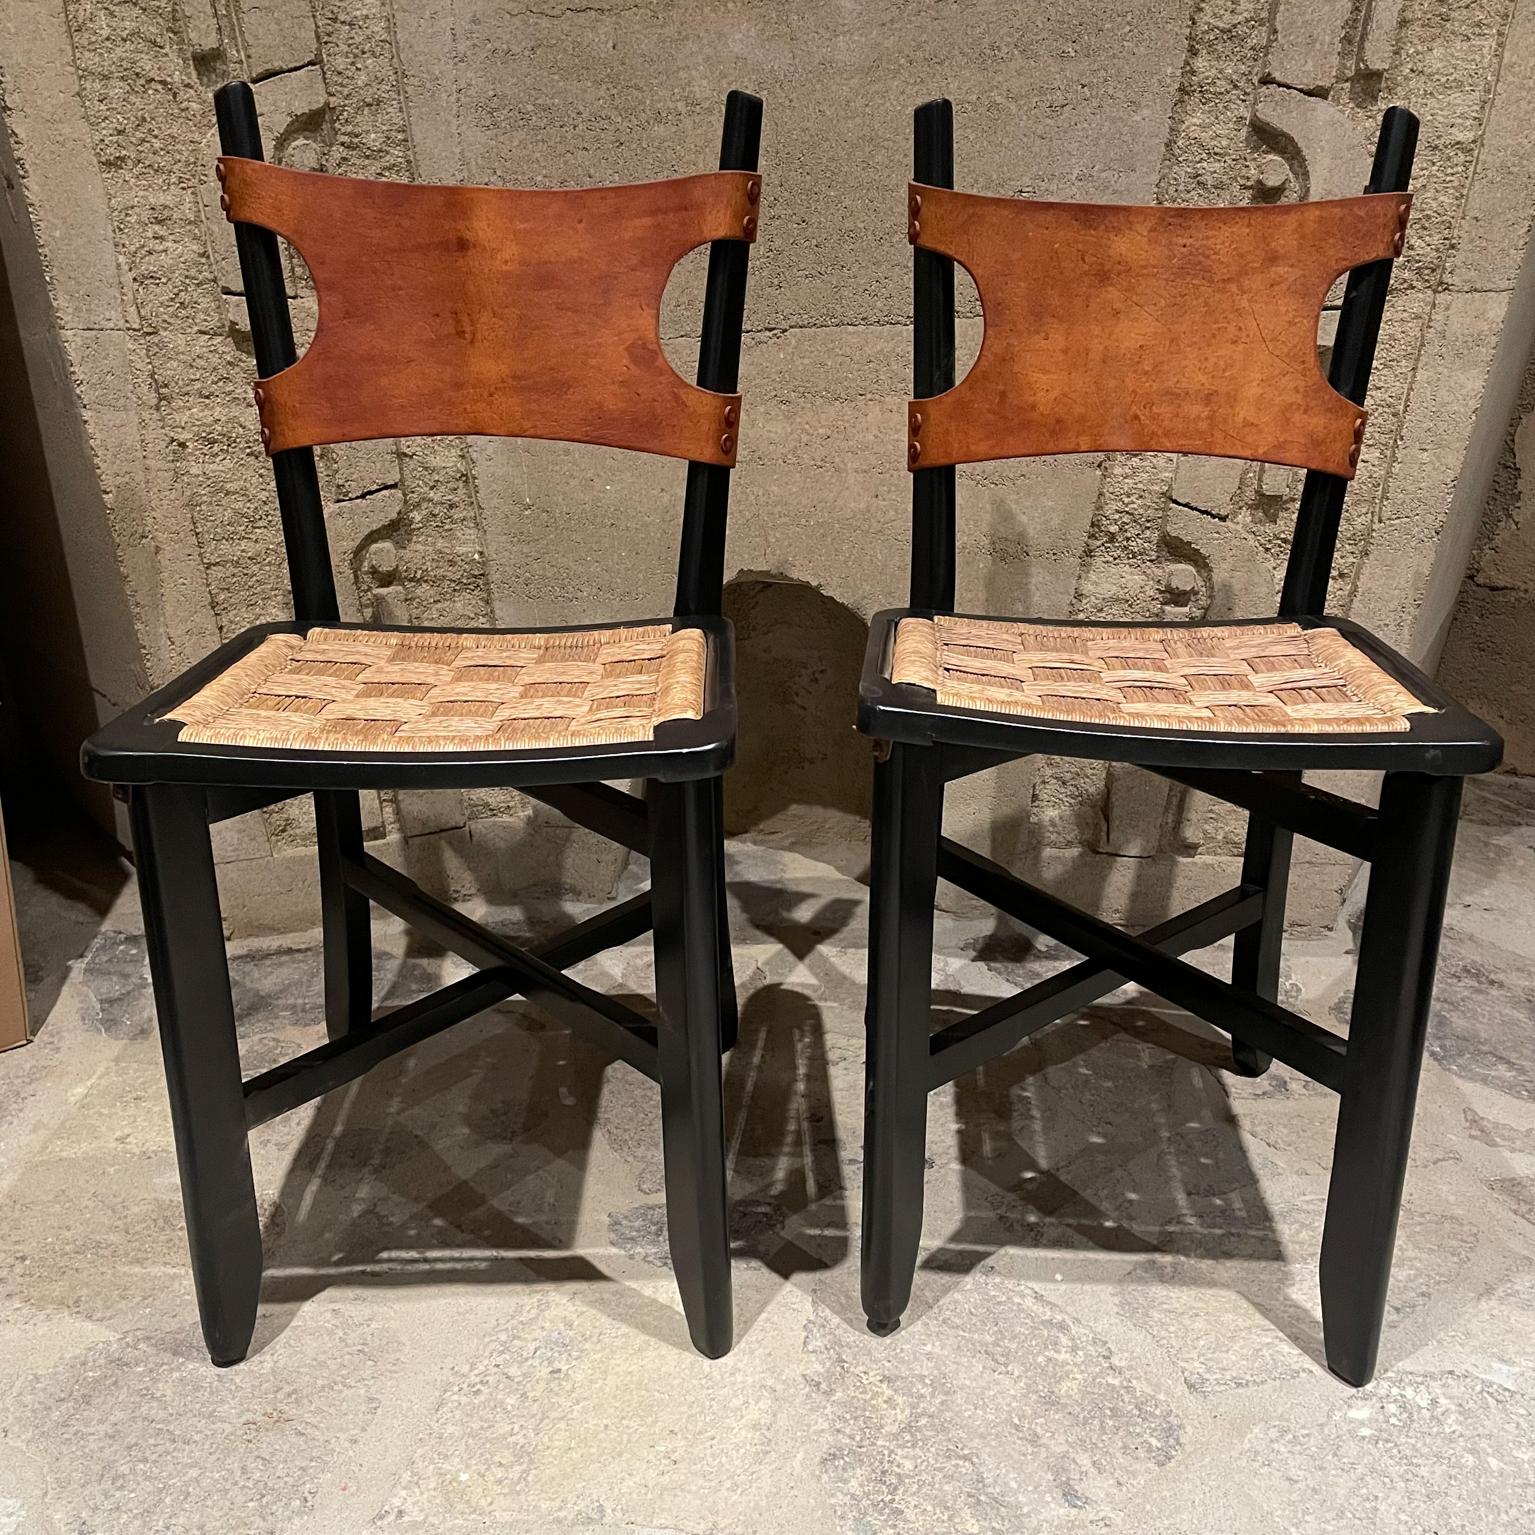 1950s Clara Porset Mexican Modernist Leather Woven Cane Folding Chairs  For Sale 2